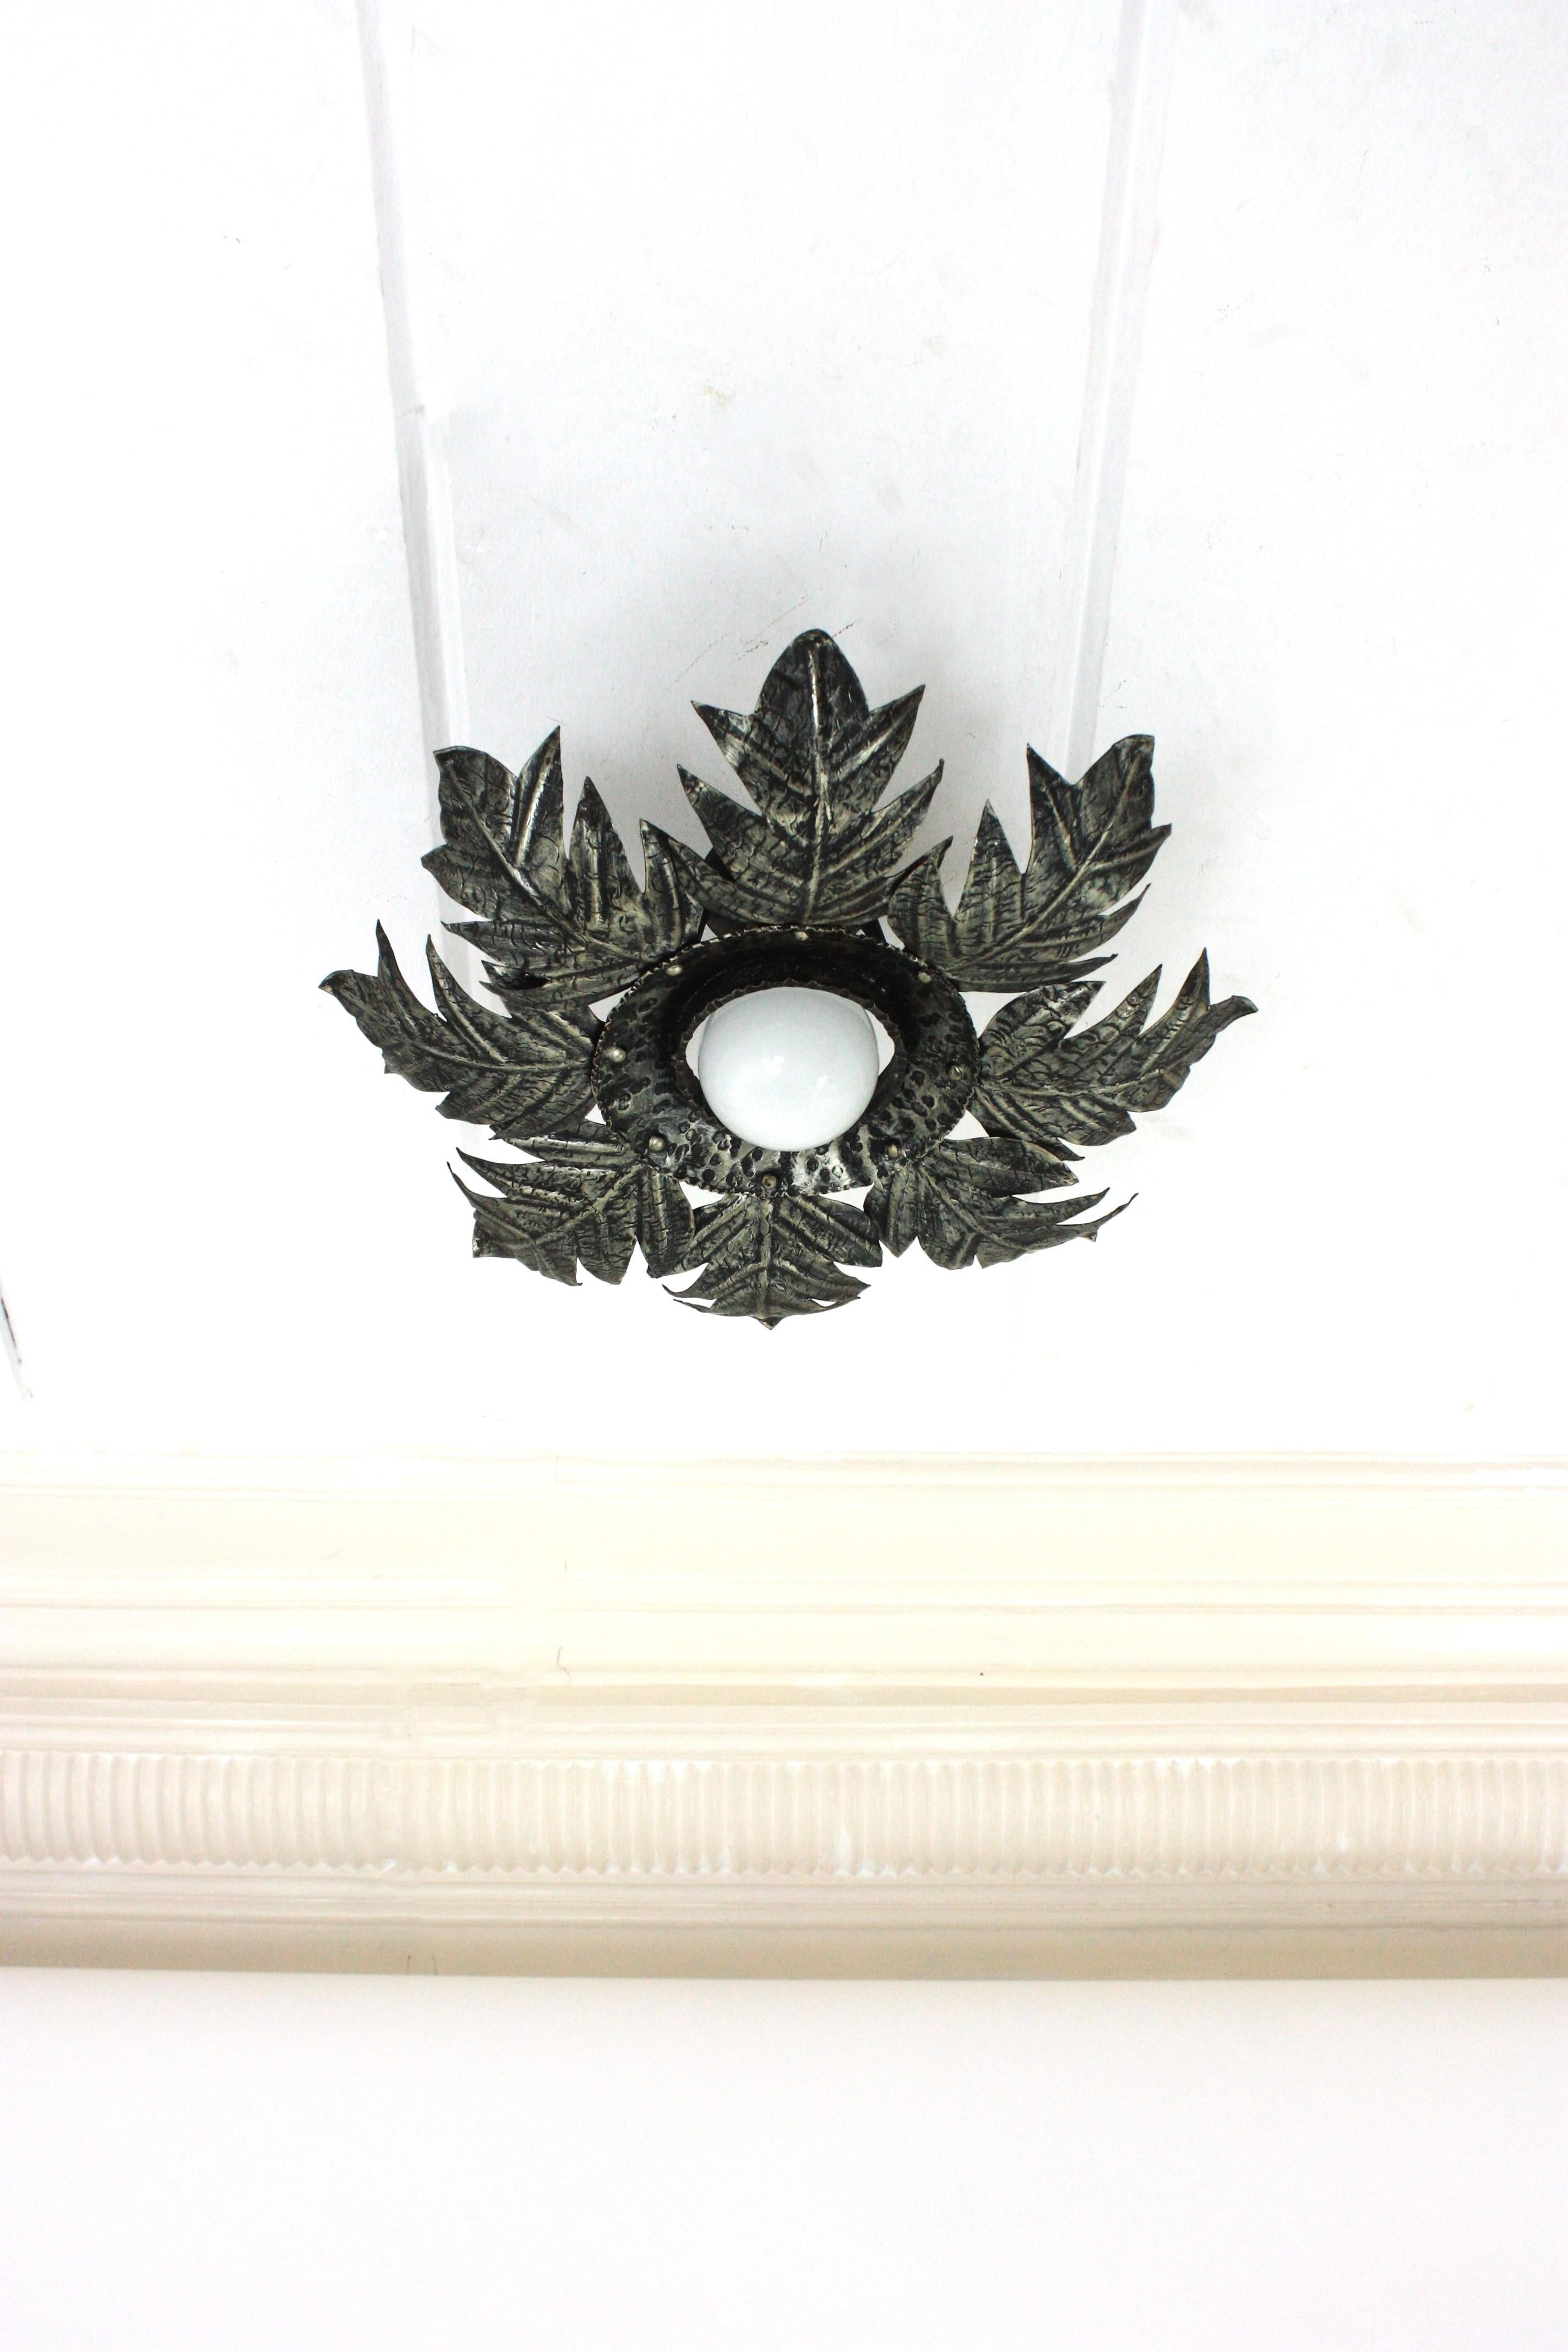 French Foliage Sunburst Light Fixture in Silvered Iron, 1950s  For Sale 2